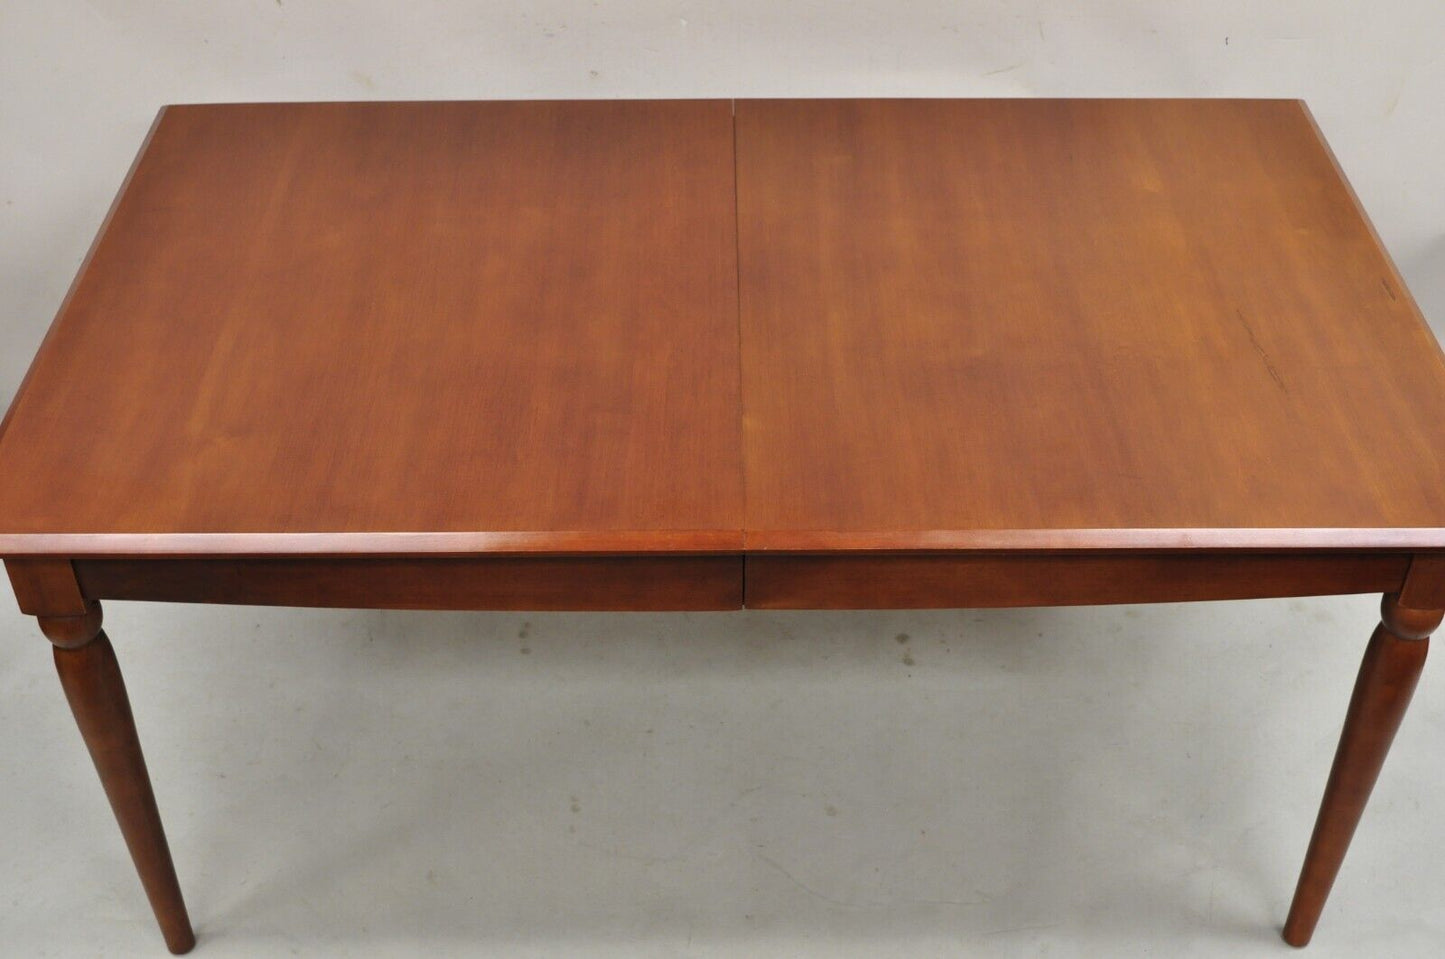 Vintage Ethan Allen American Dimensions Collection Cherry Wood Dining Table